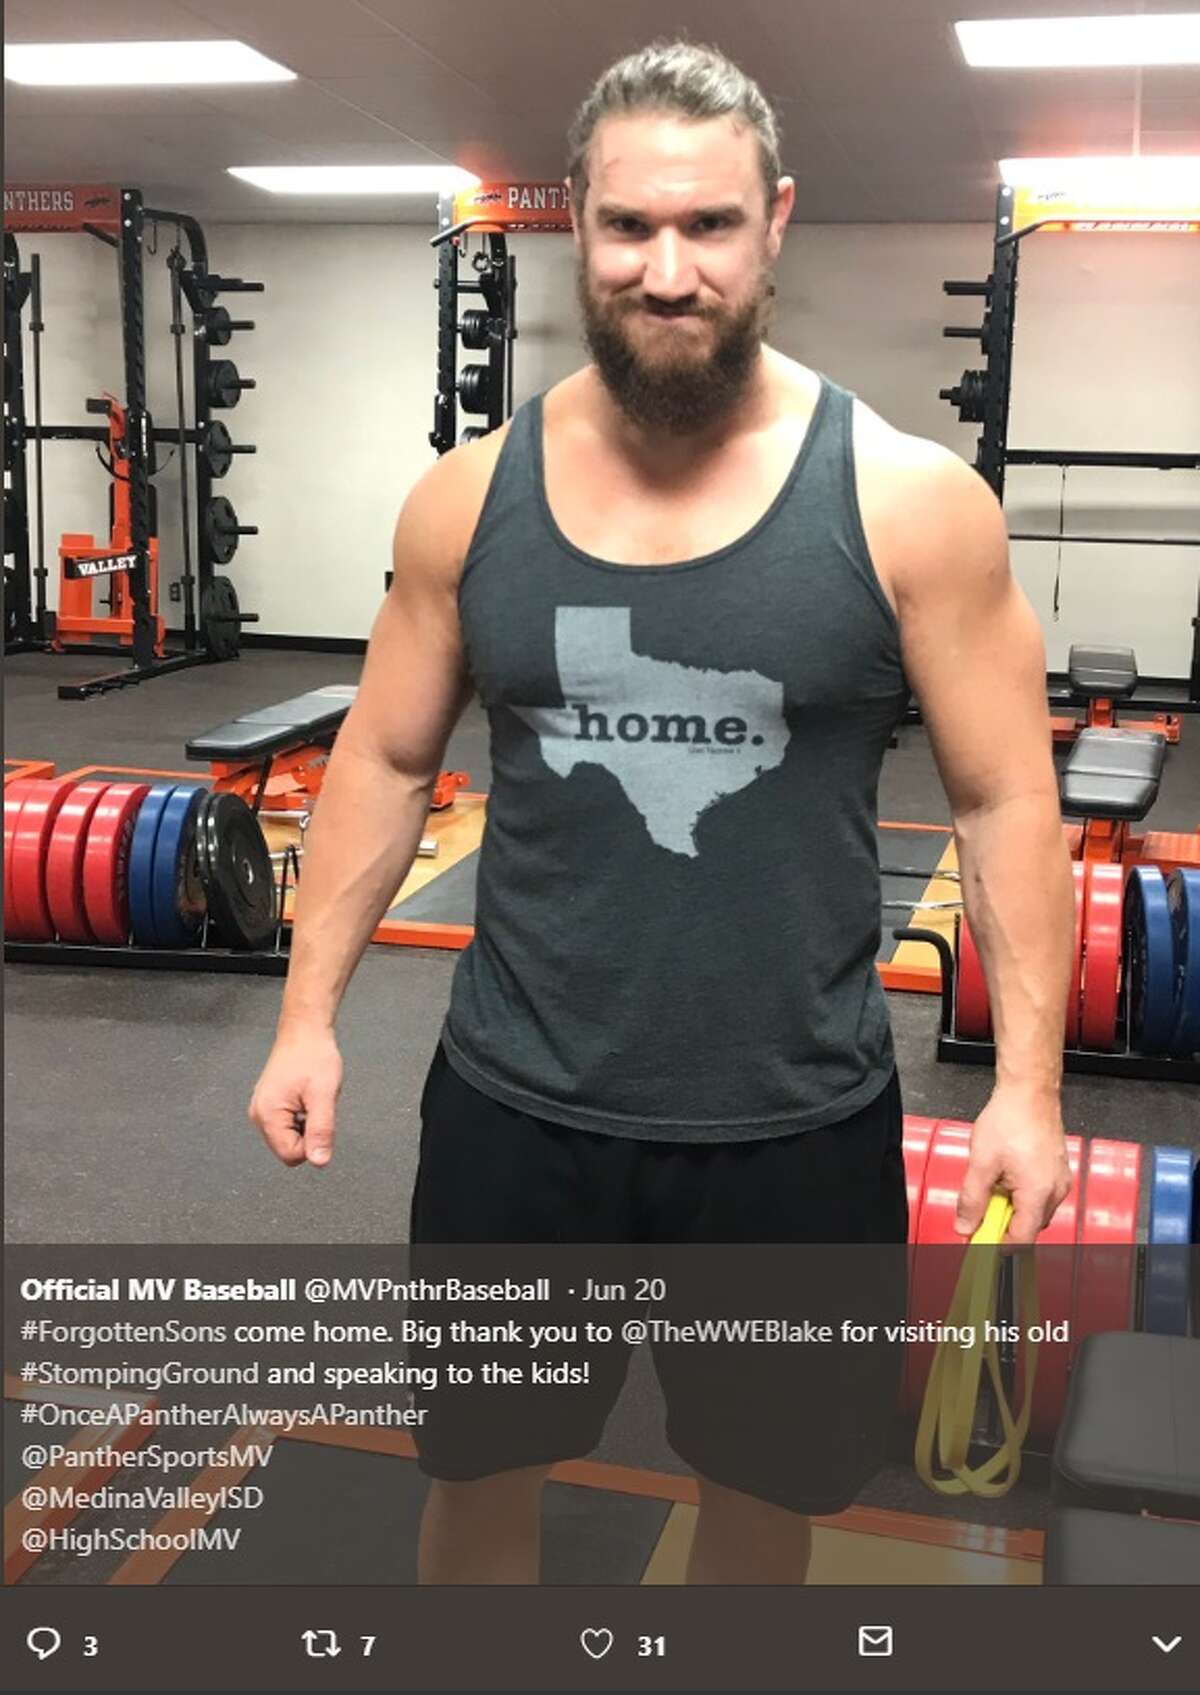 WWE NXT Superstar Wesley Blake returned to his alma mater at Medina Valley High School. The Medina Valley High School baseball team posted about the visit on its Twitter feed, thanking him for speaking to the athletes.  